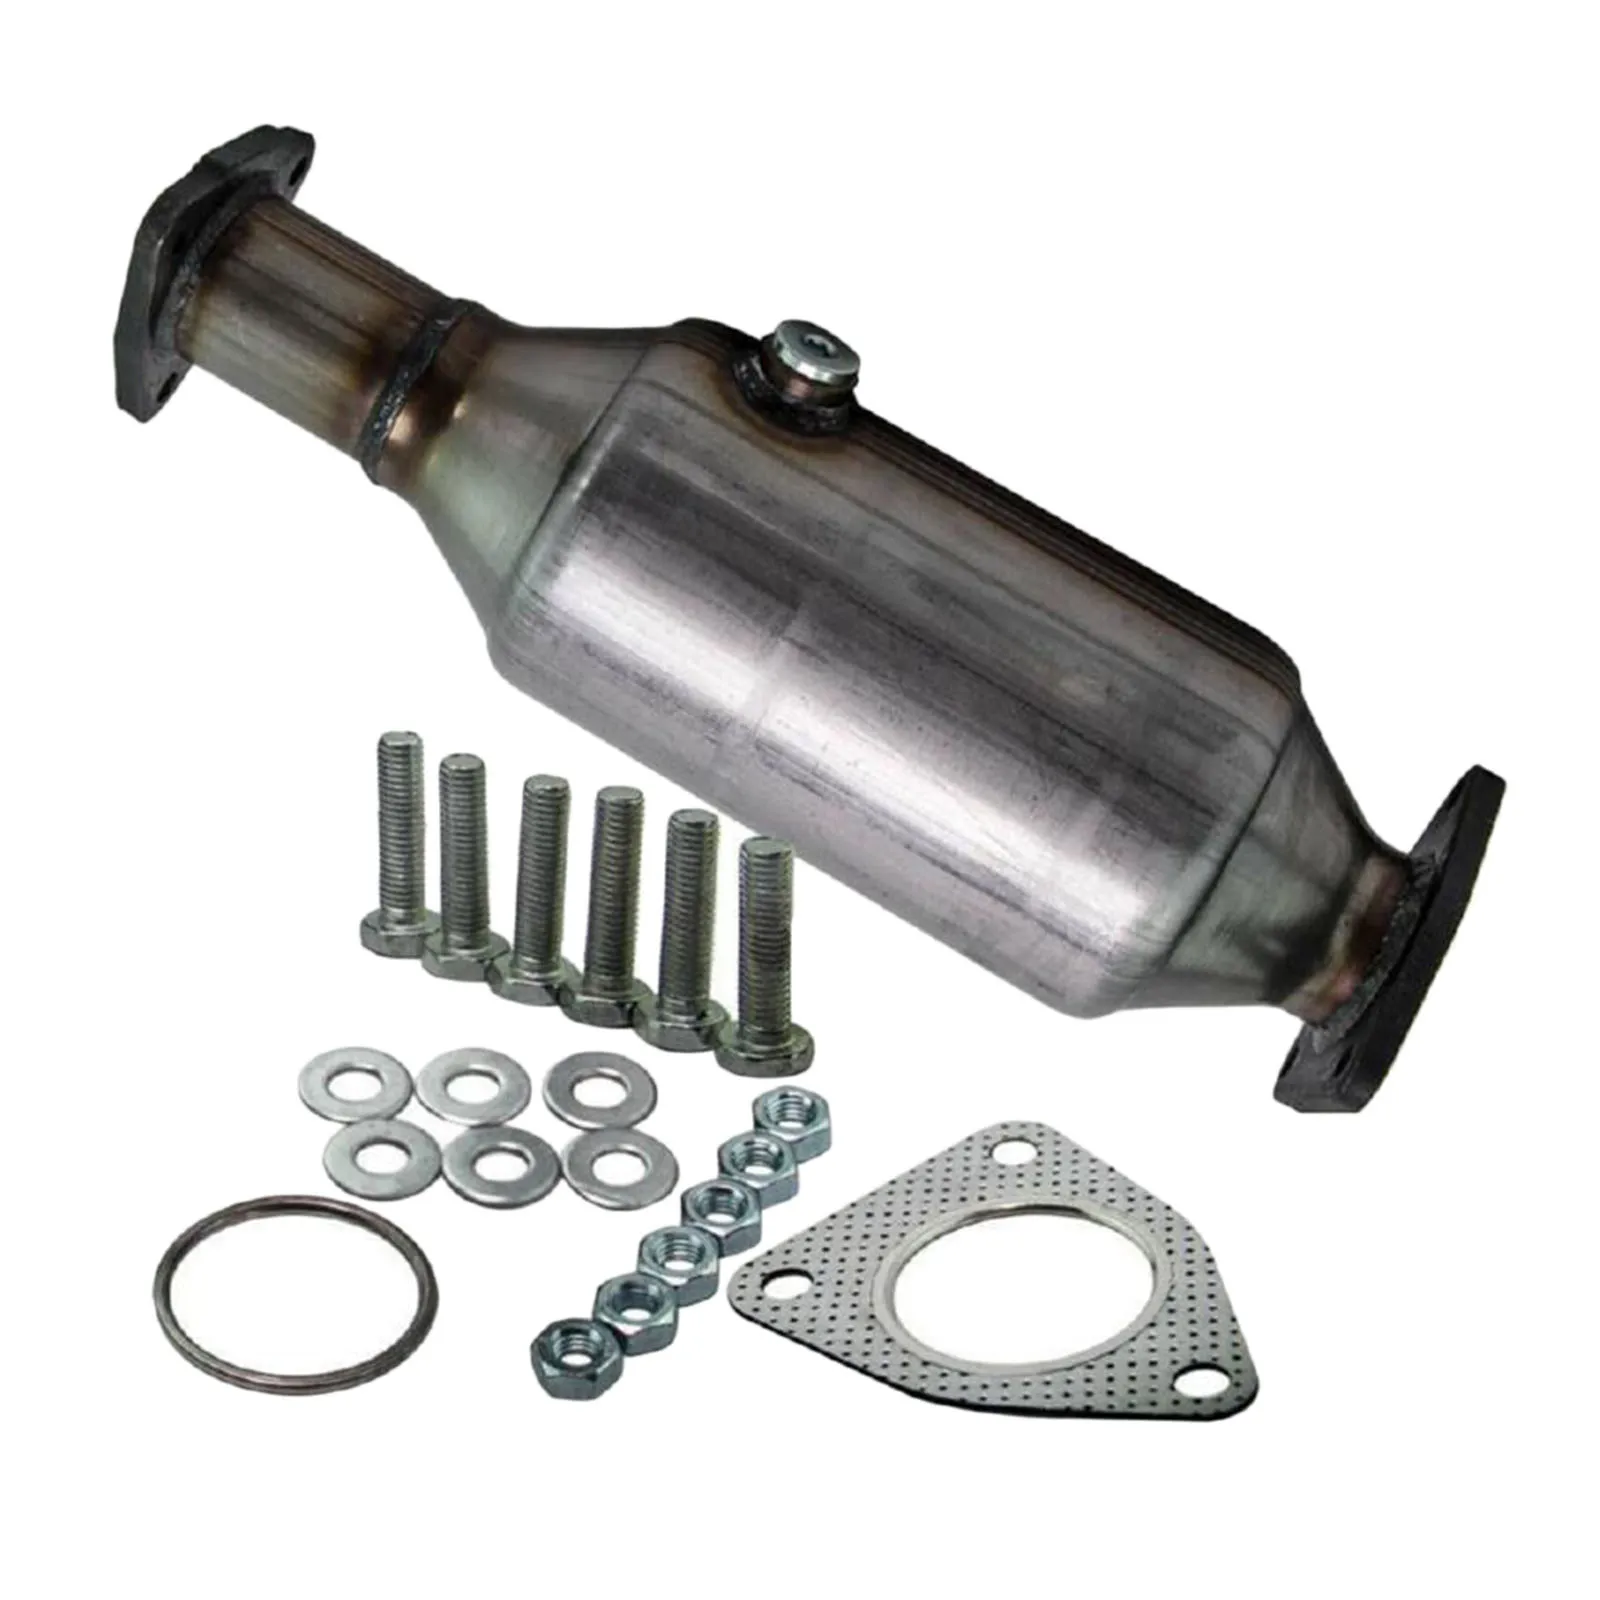 Catalytic Converter Compatible with 1998-2002 Honda Accord 2.3L High Flow Series Flange Design Includes Bolts and Gasket